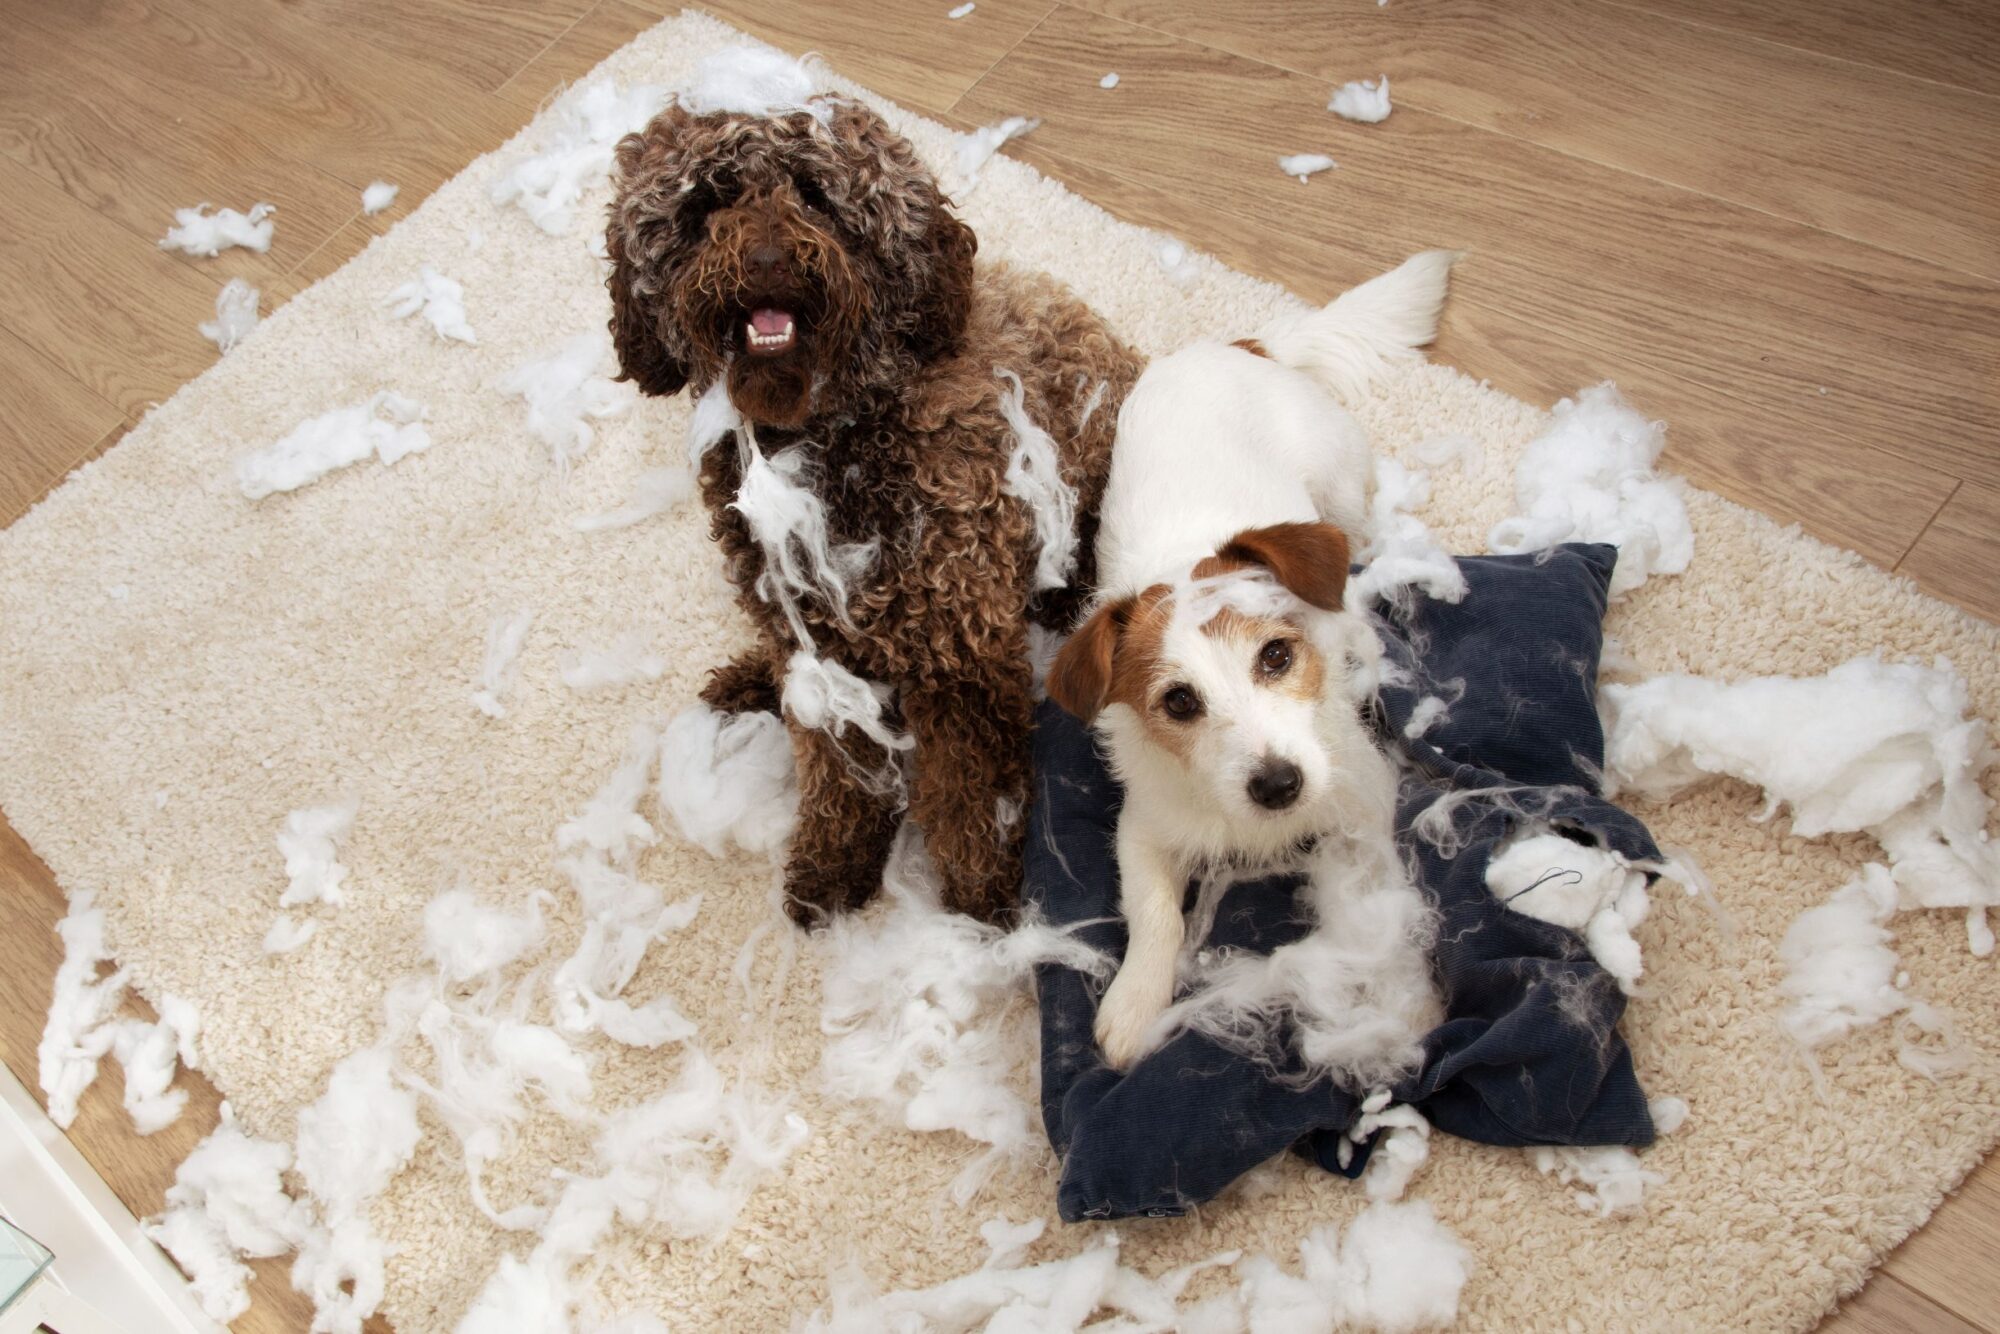 Two dogs chewing up a pillow.